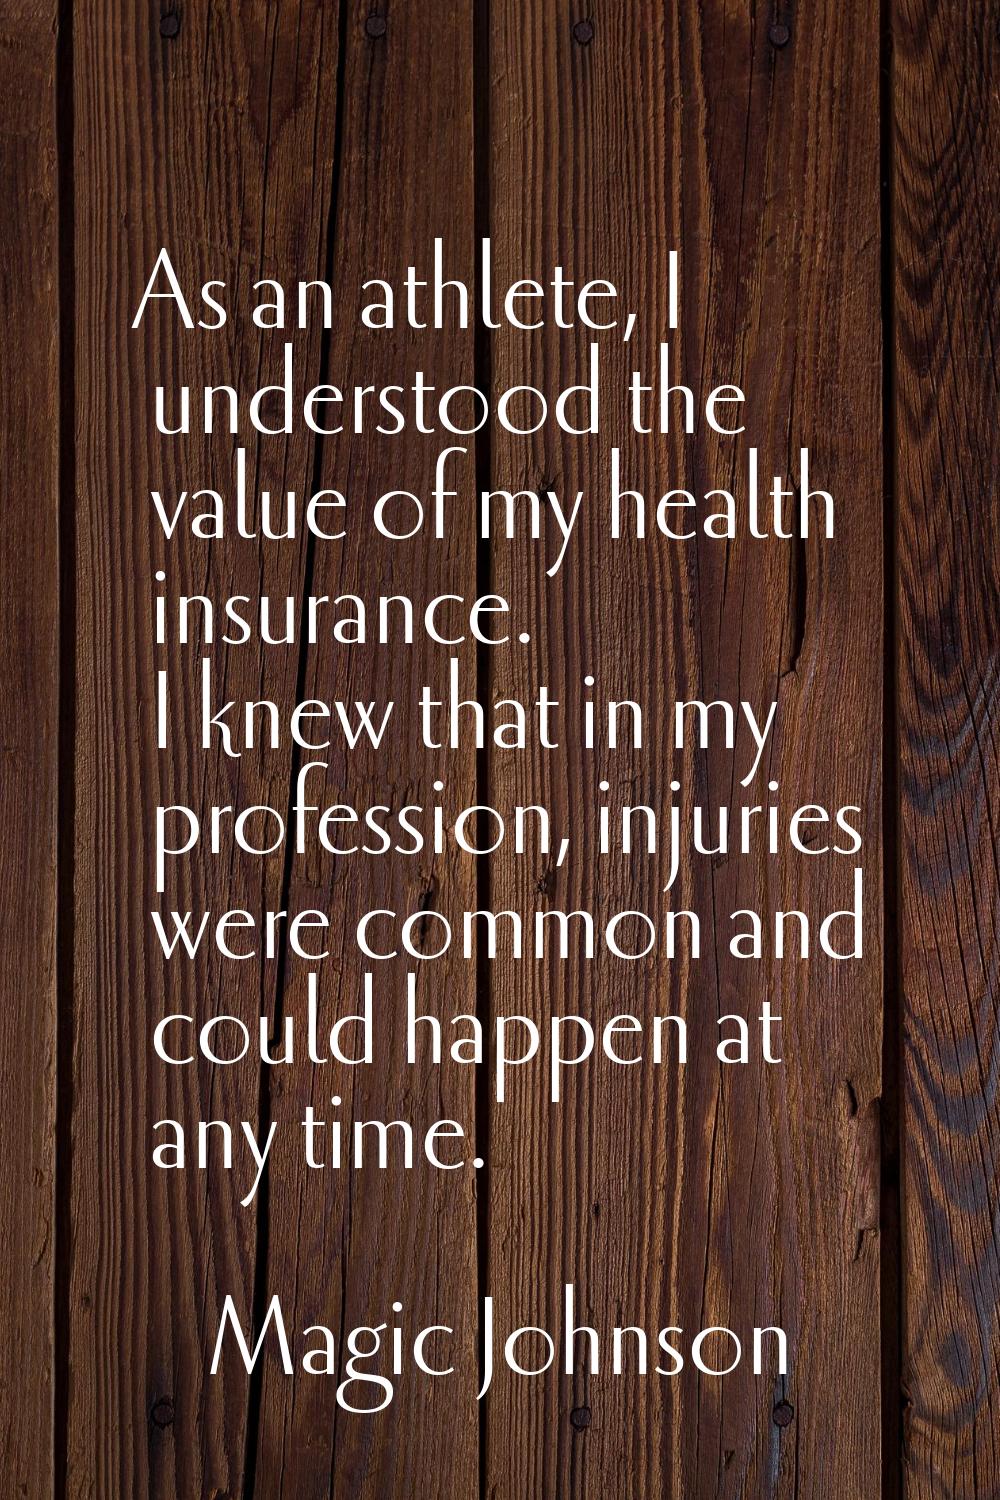 As an athlete, I understood the value of my health insurance. I knew that in my profession, injurie